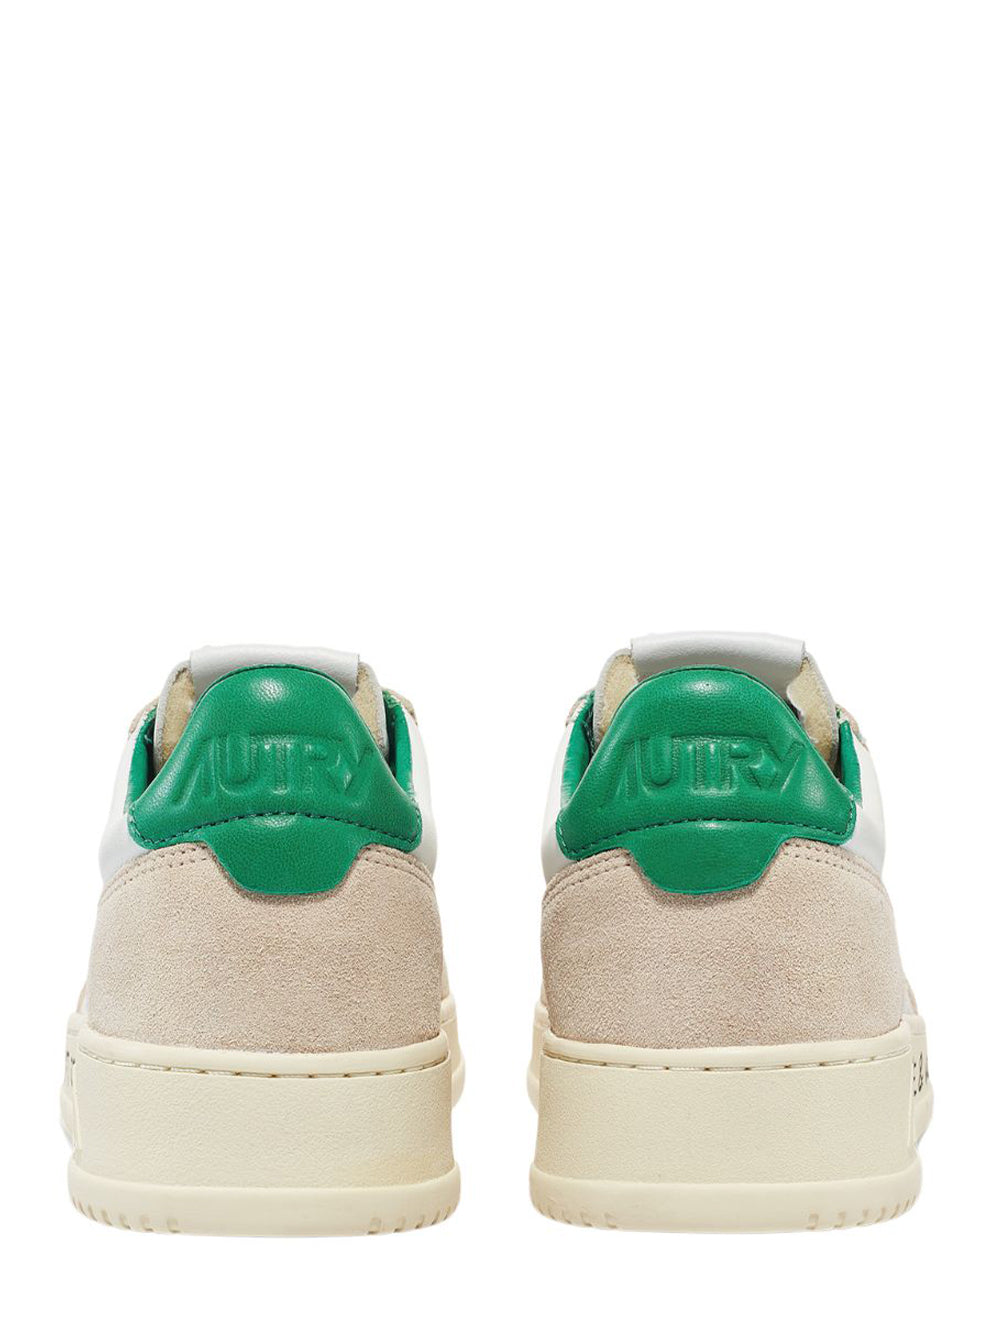 Medalist Low Sneakers In Leather And Suede (White And Green) (Women)